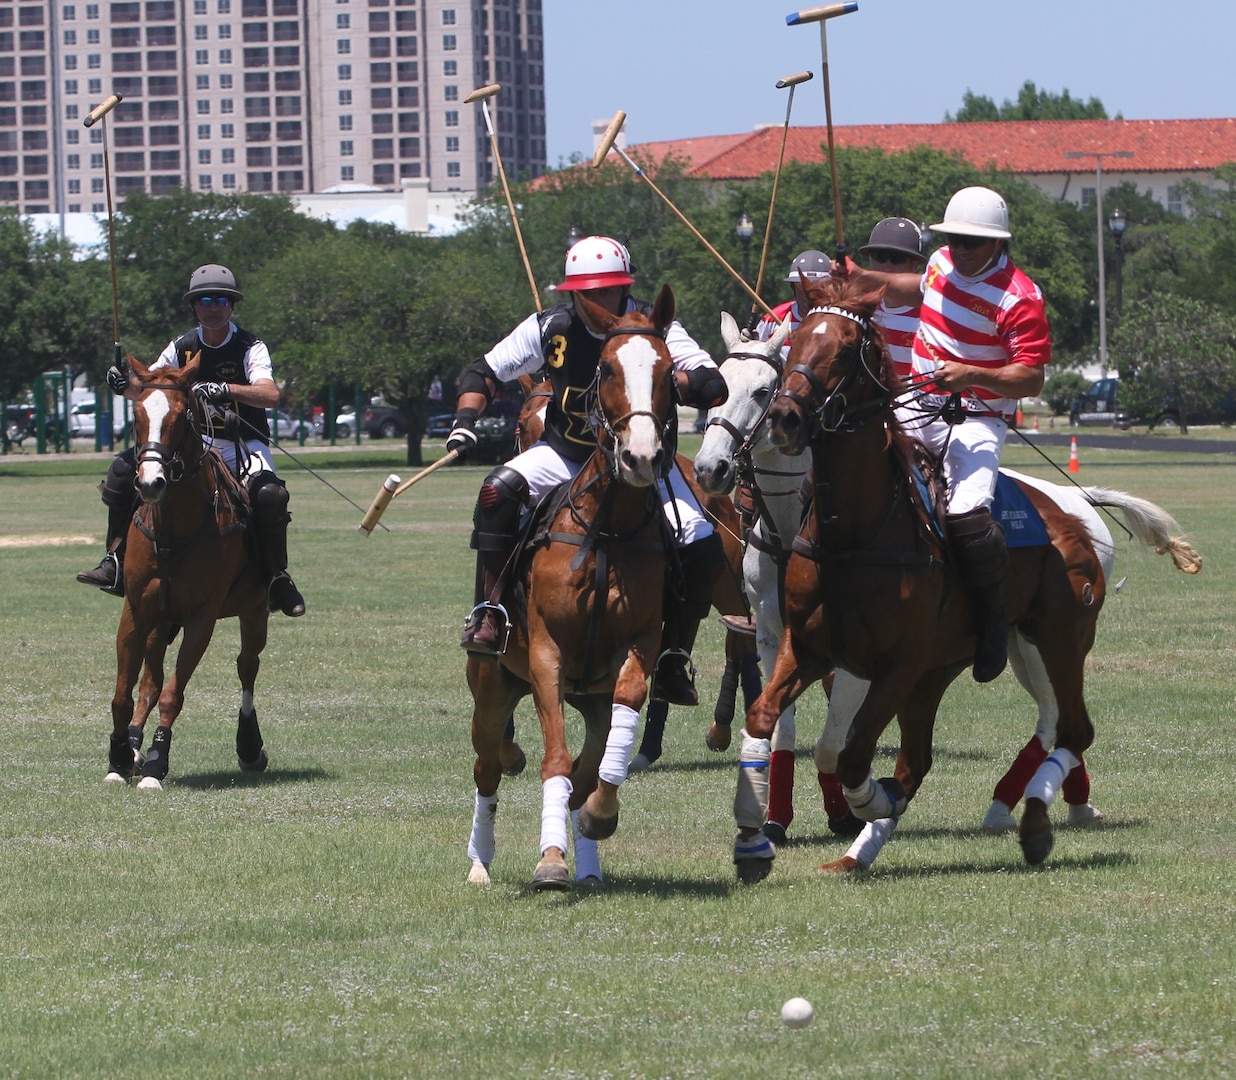 Players charge after a free ball in a polo match May 5, 2018, at Joint Base San Antonio-Fort Sam Houston. The match was the first time polo was played on the base in more than 50 years. A polo match would’ve been a common sight on Army bases in the early 20th century. Notable advocates and players included Gen. John Pershing, Gen. George Patton Jr., and Medal of Honor recipient Col. Gordon Johnston. The USPA created the Col. Gordon Johnston Sportsmanship Award in his honor.